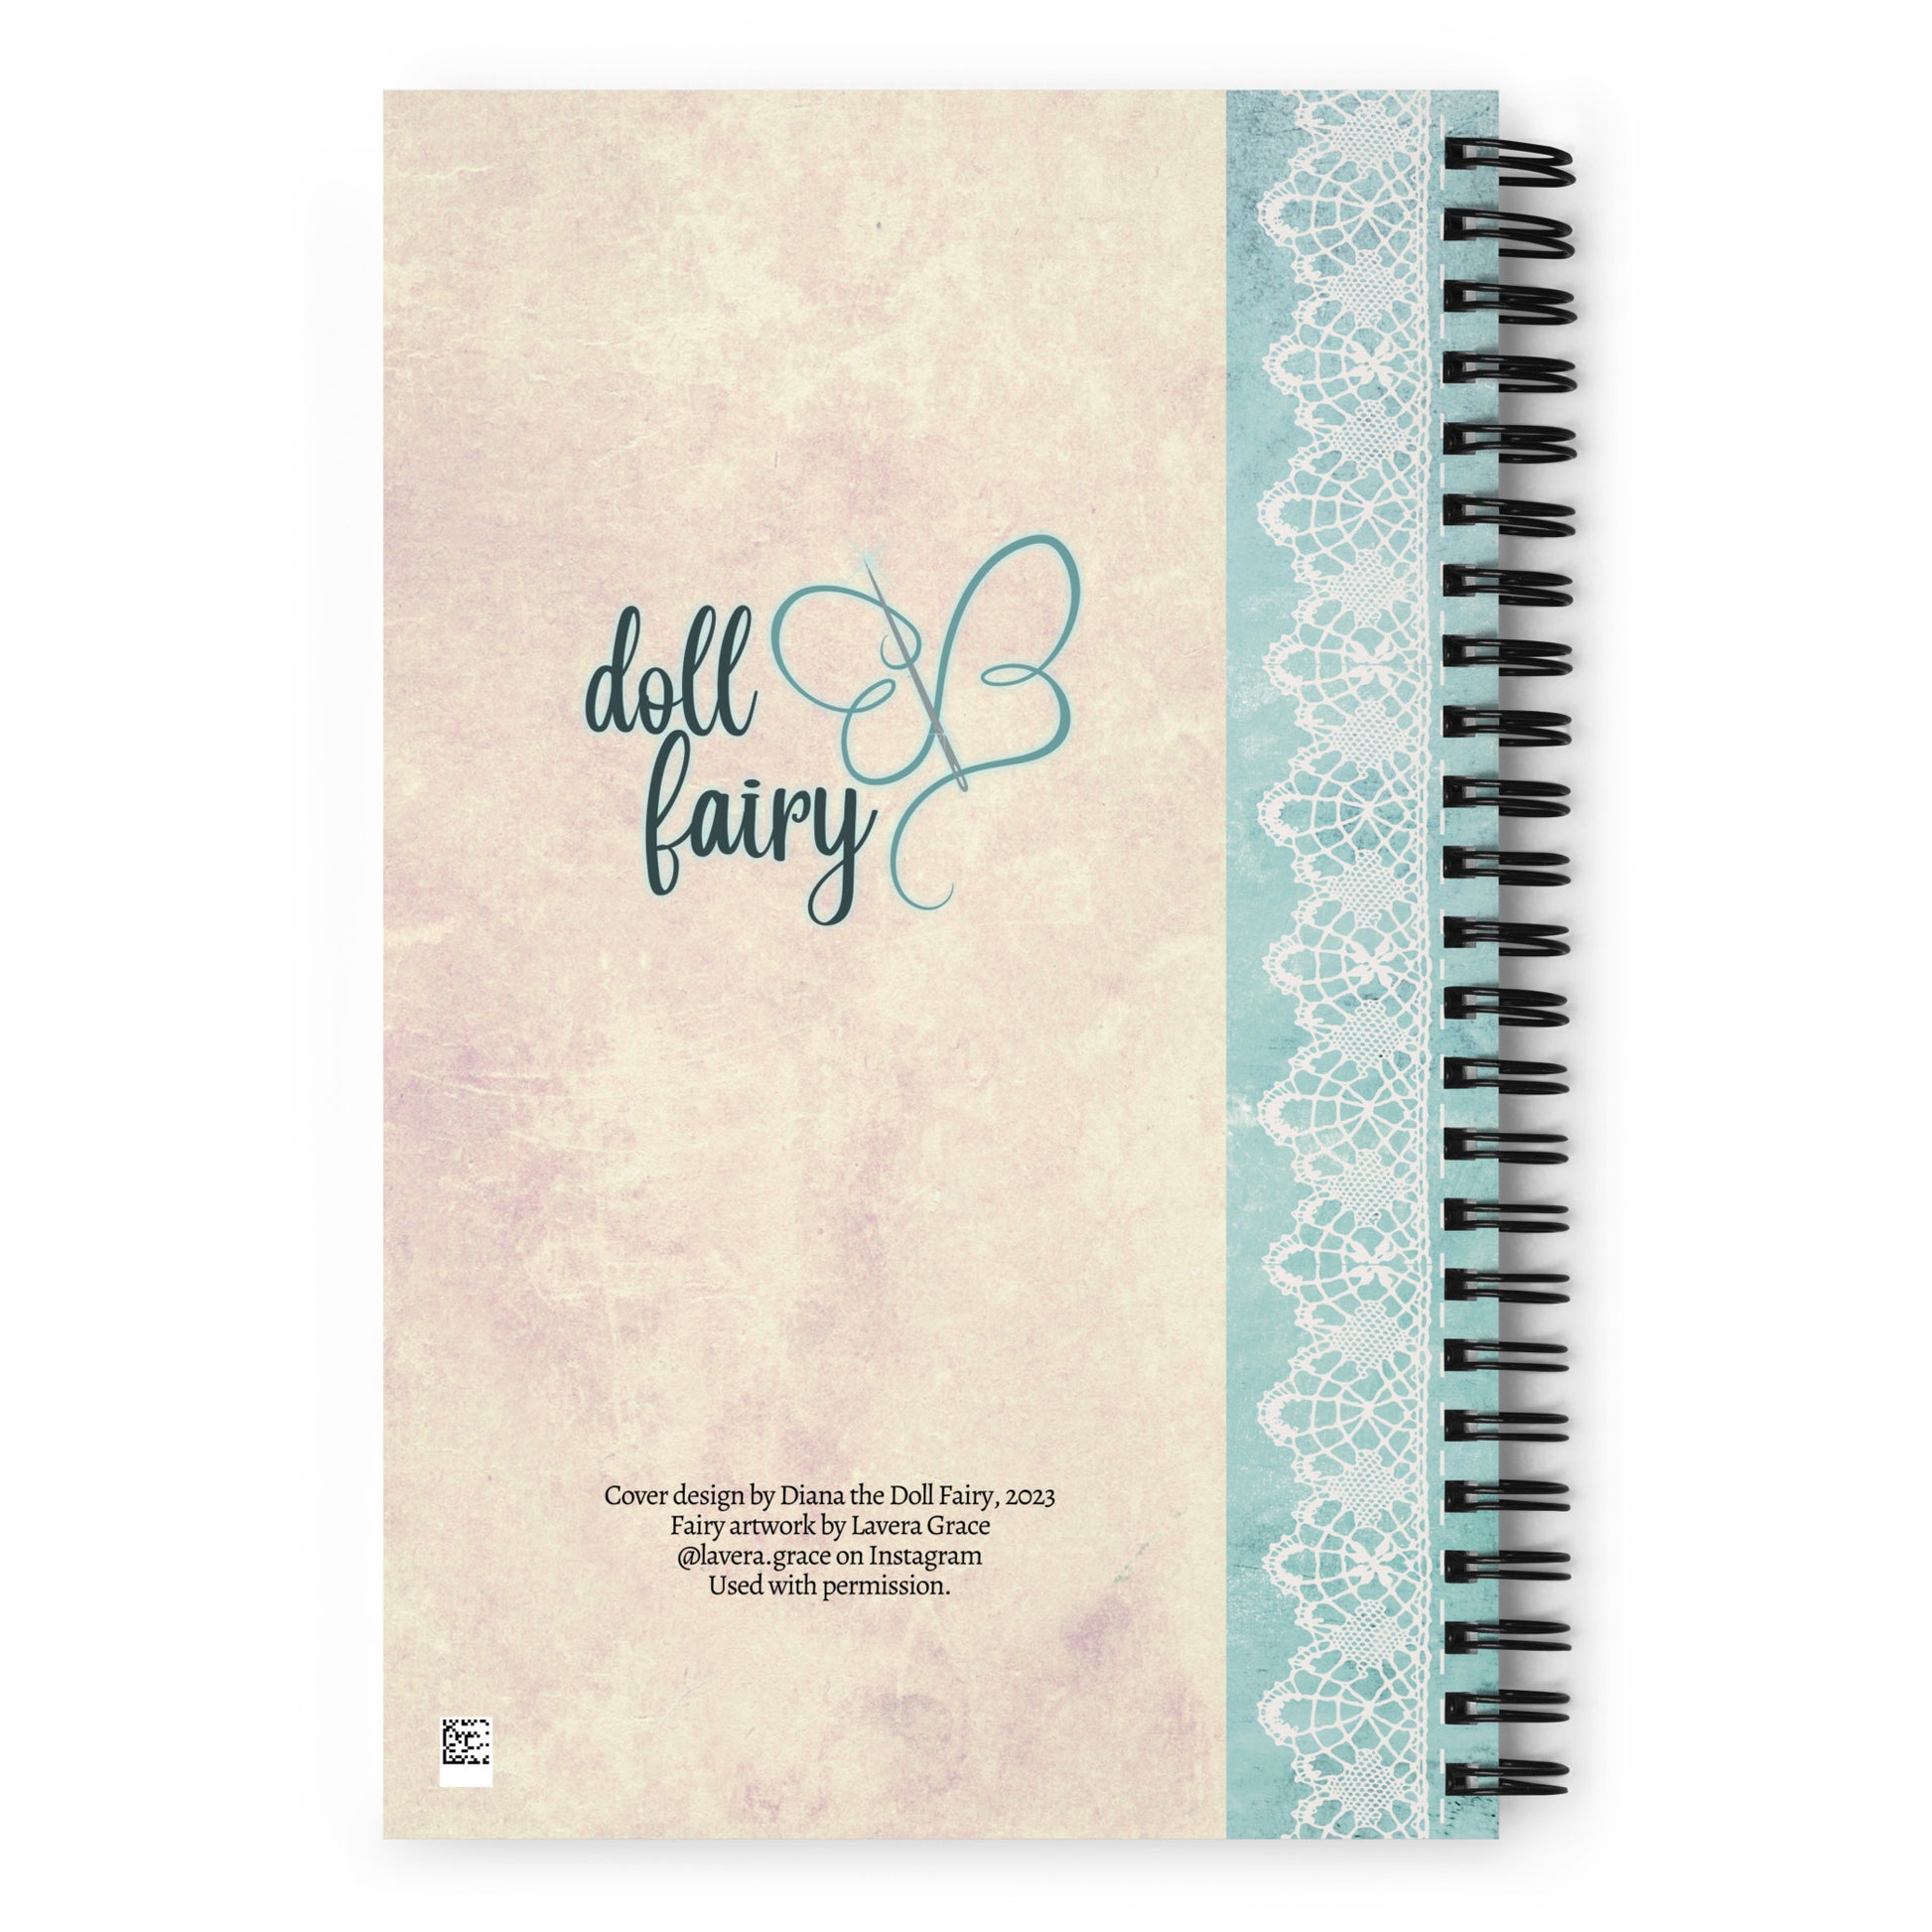 "Be True to the Magic in You" Bullet Journal Spiral Notebook - The Doll Fairy